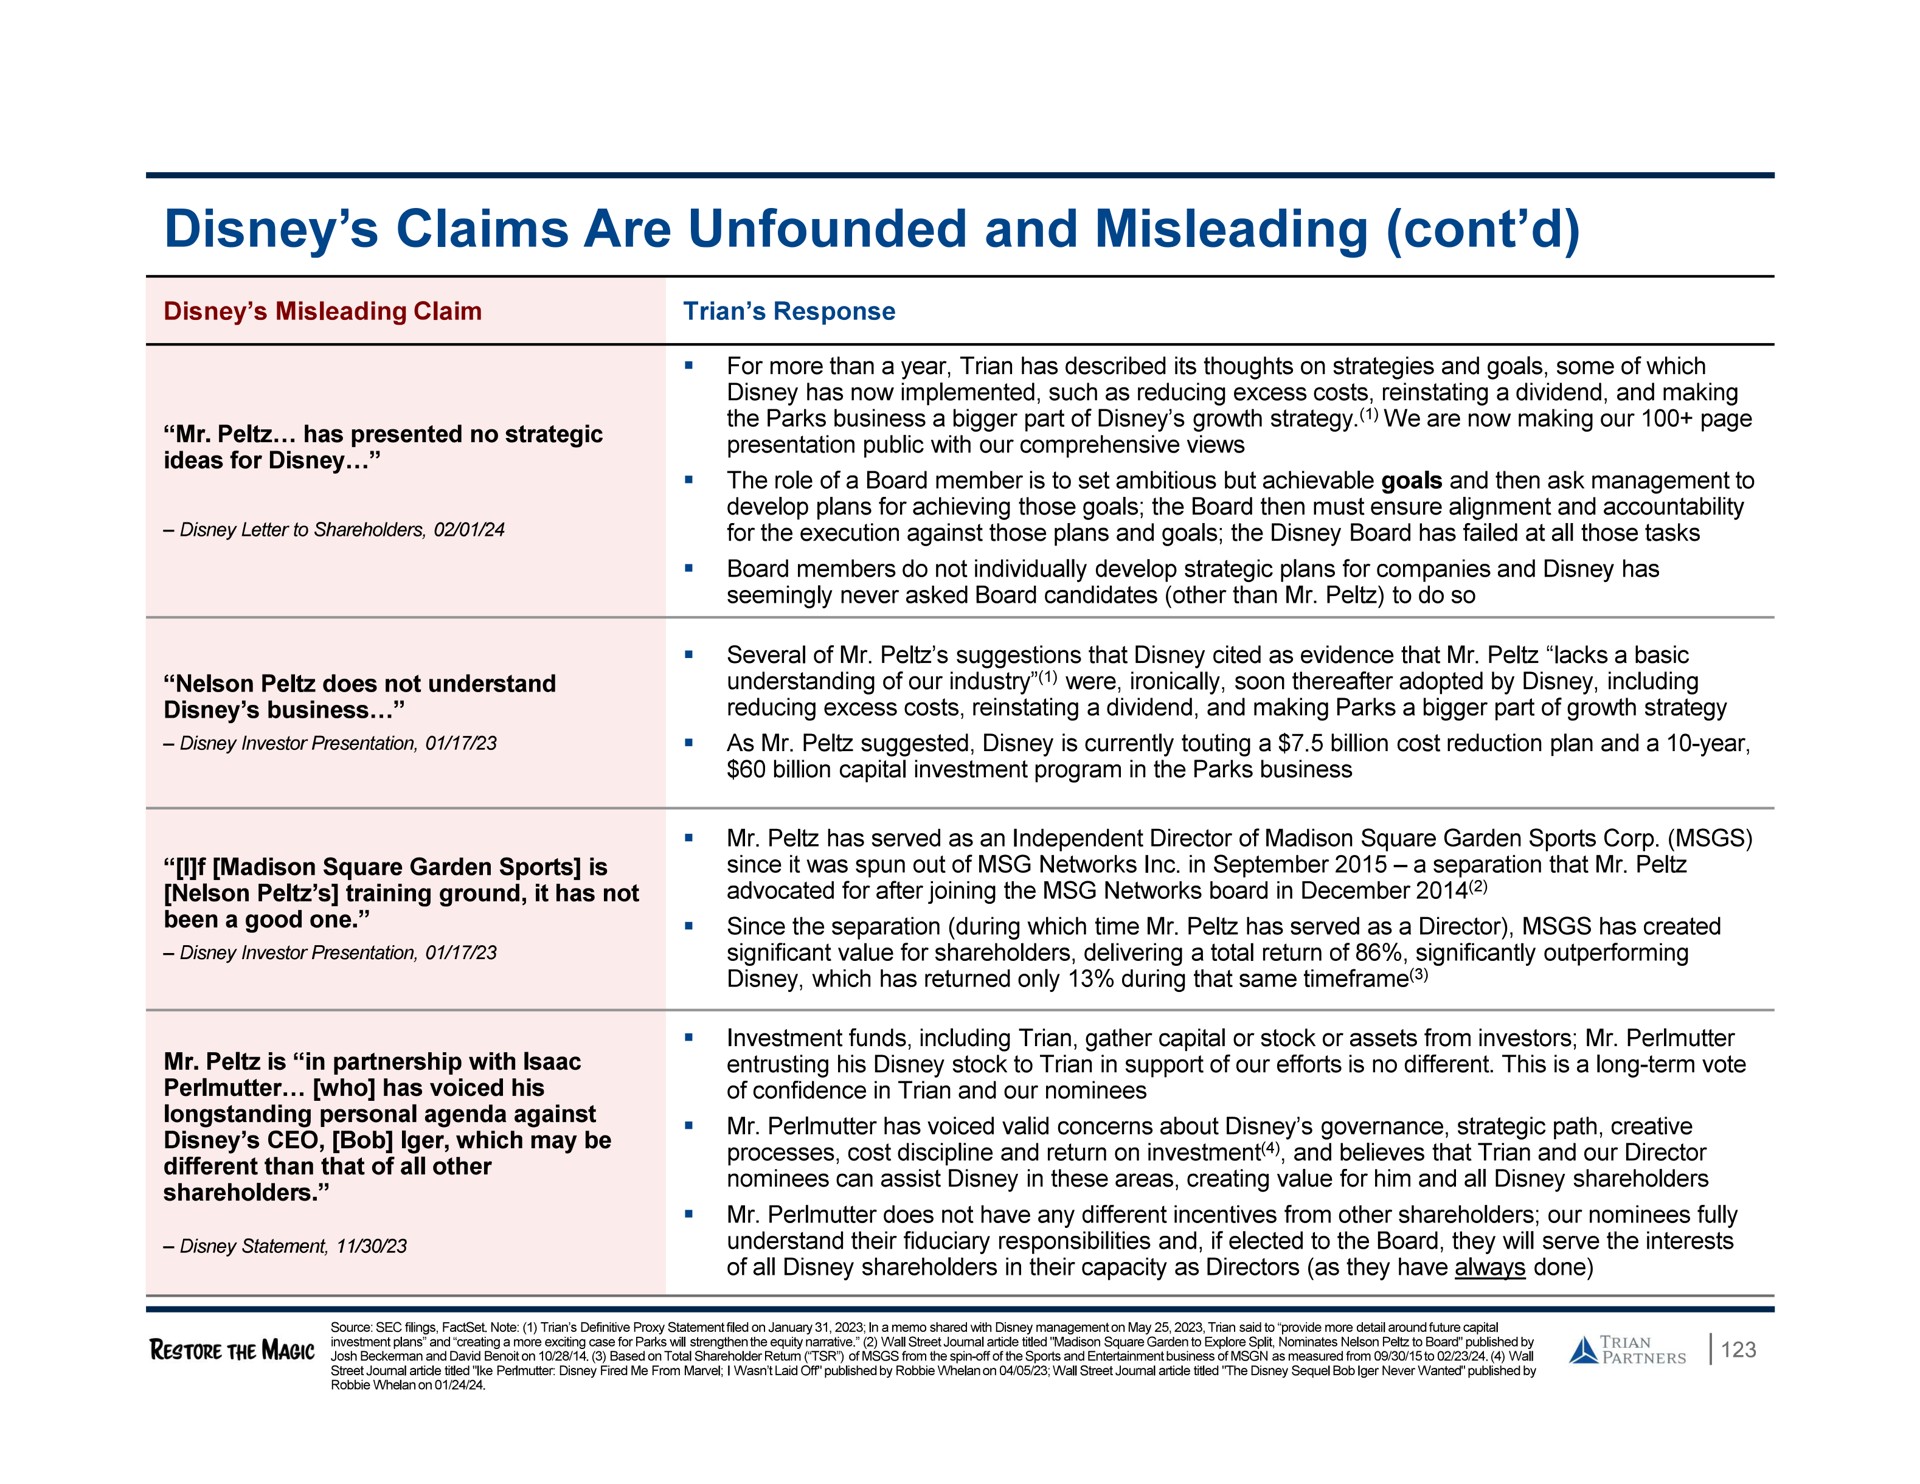 claims are unfounded and misleading | Trian Partners